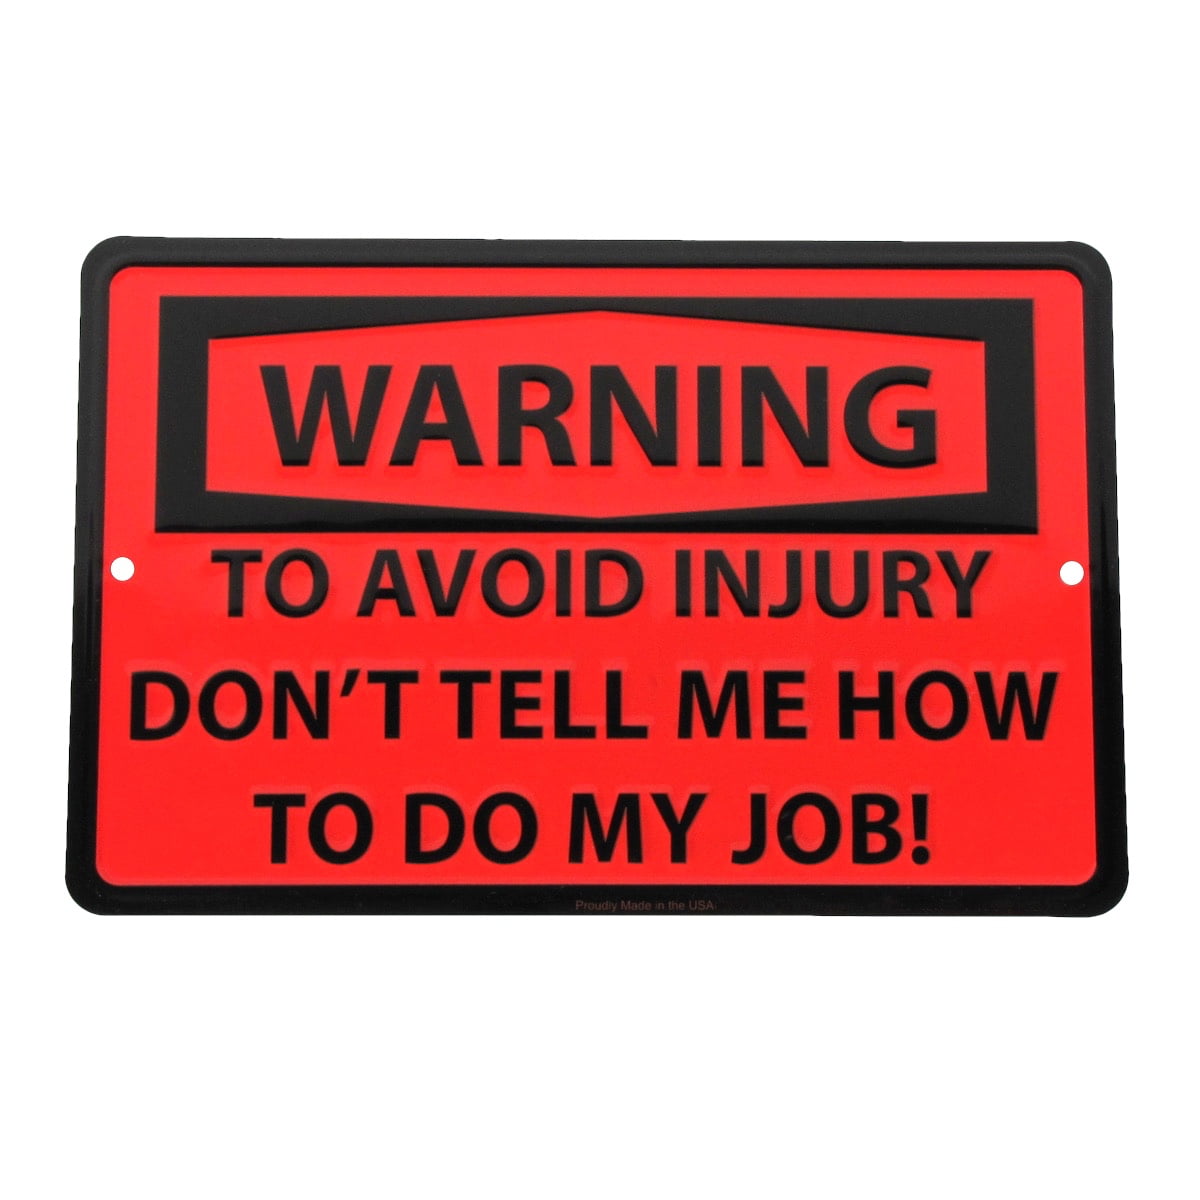 Complaints Deadline Funny Metal Sign US Made Business Office Job Site Wall Decor 